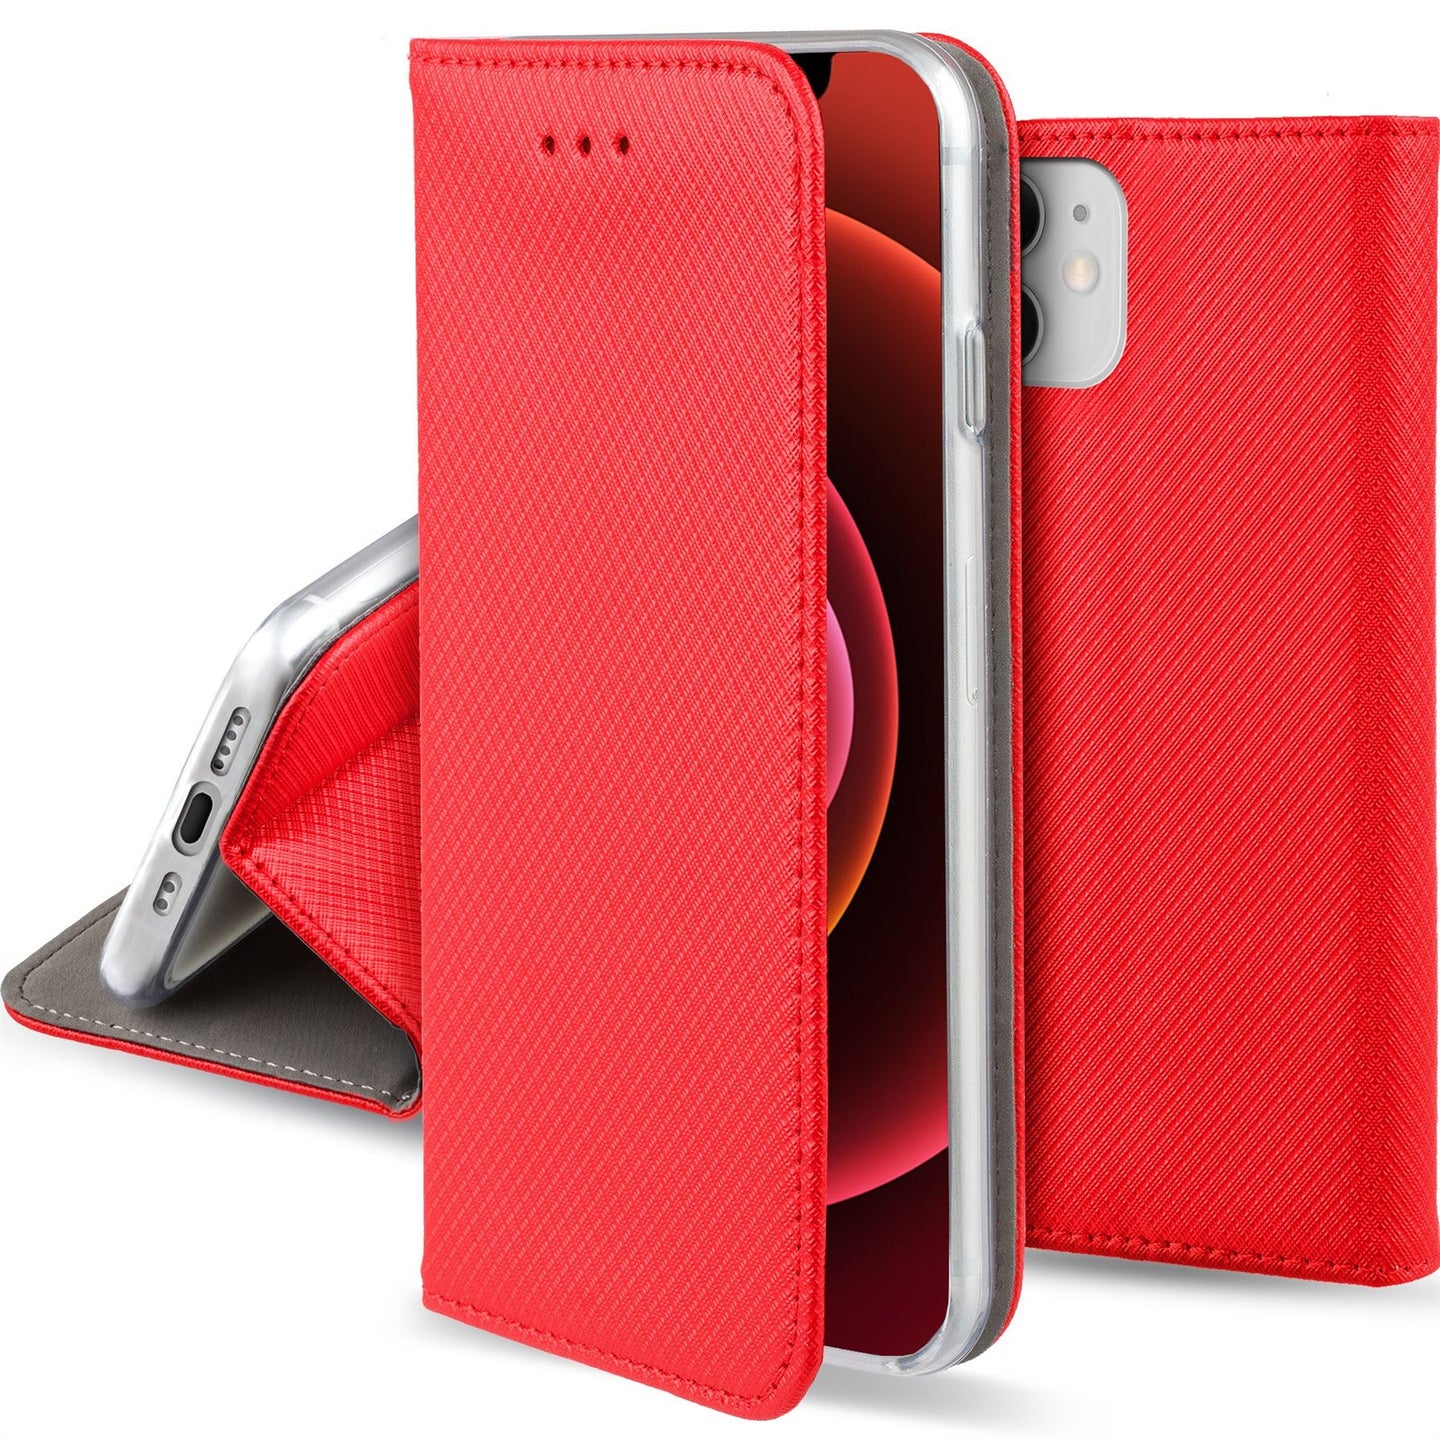 Moozy Case Flip Cover for iPhone 12, iPhone 12 Pro, Red - Smart Magnetic Flip Case with Card Holder and Stand